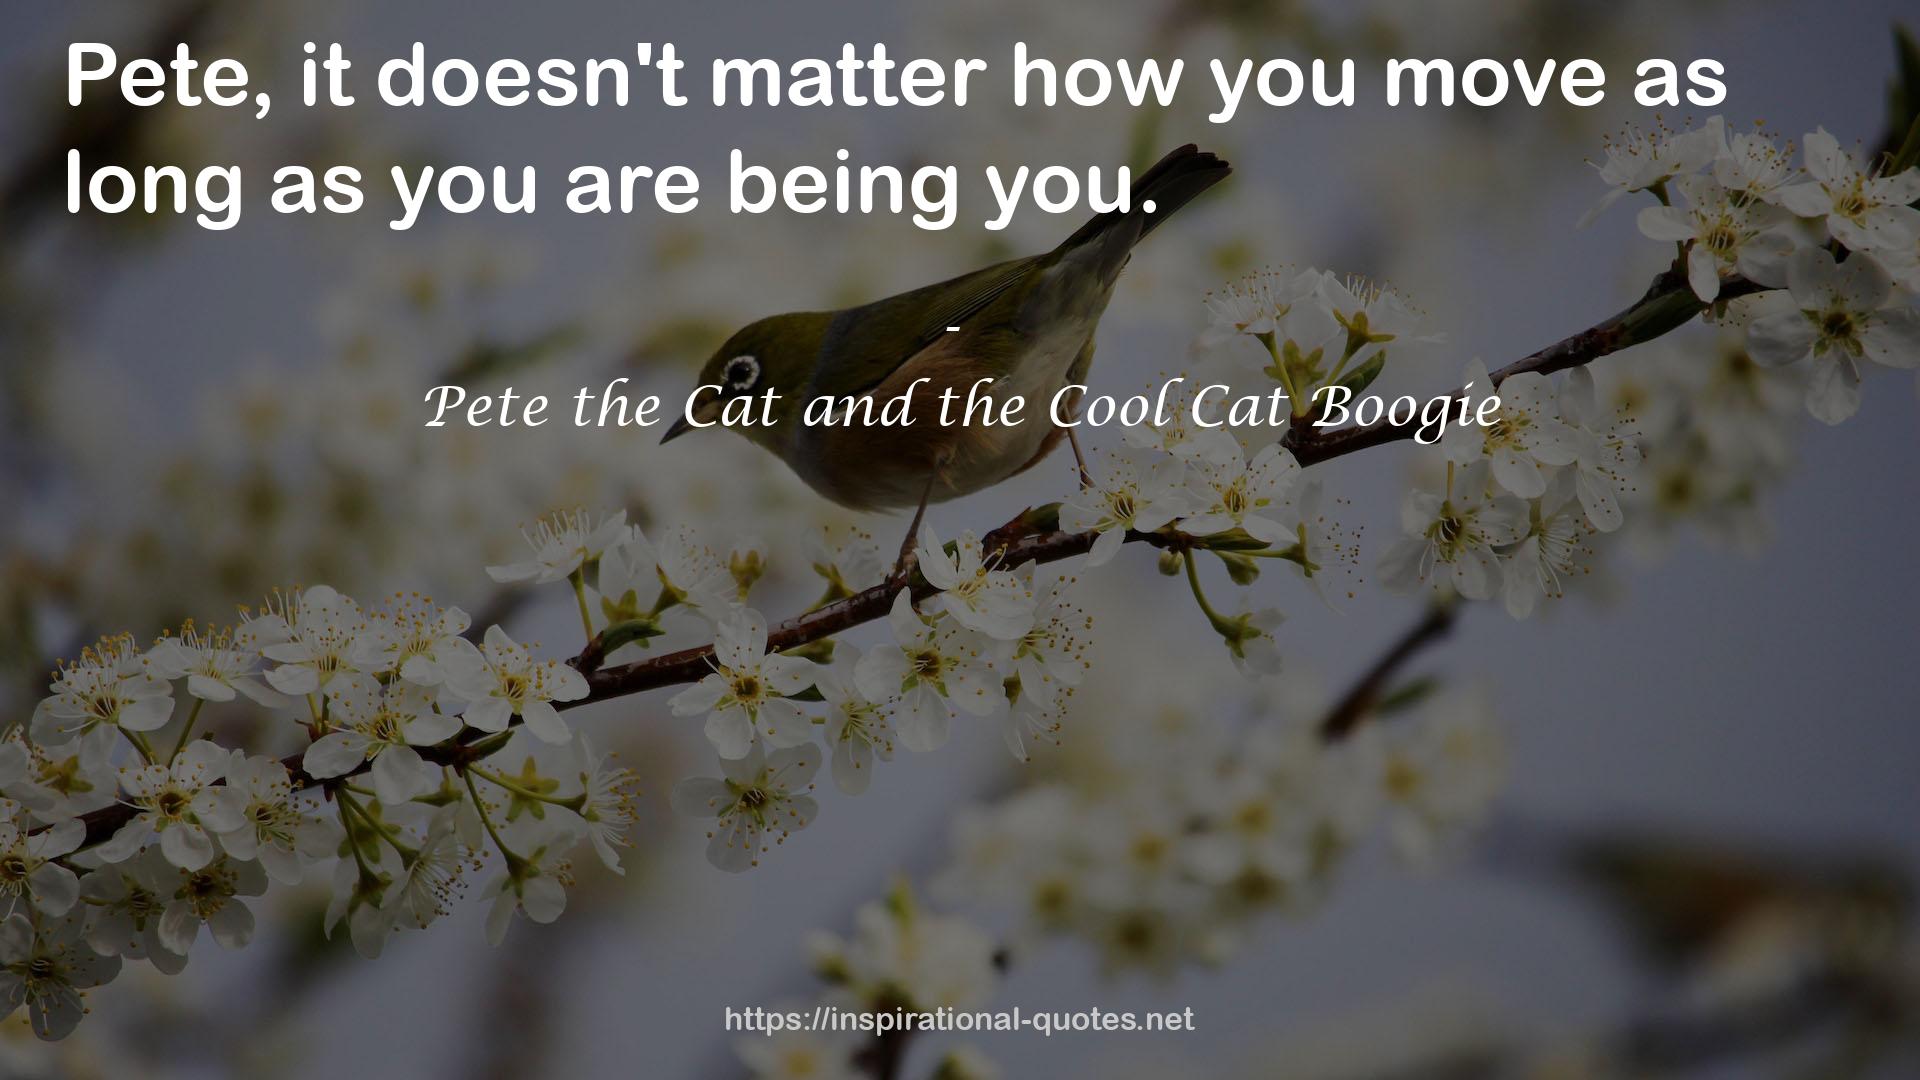 Pete the Cat and the Cool Cat Boogie QUOTES